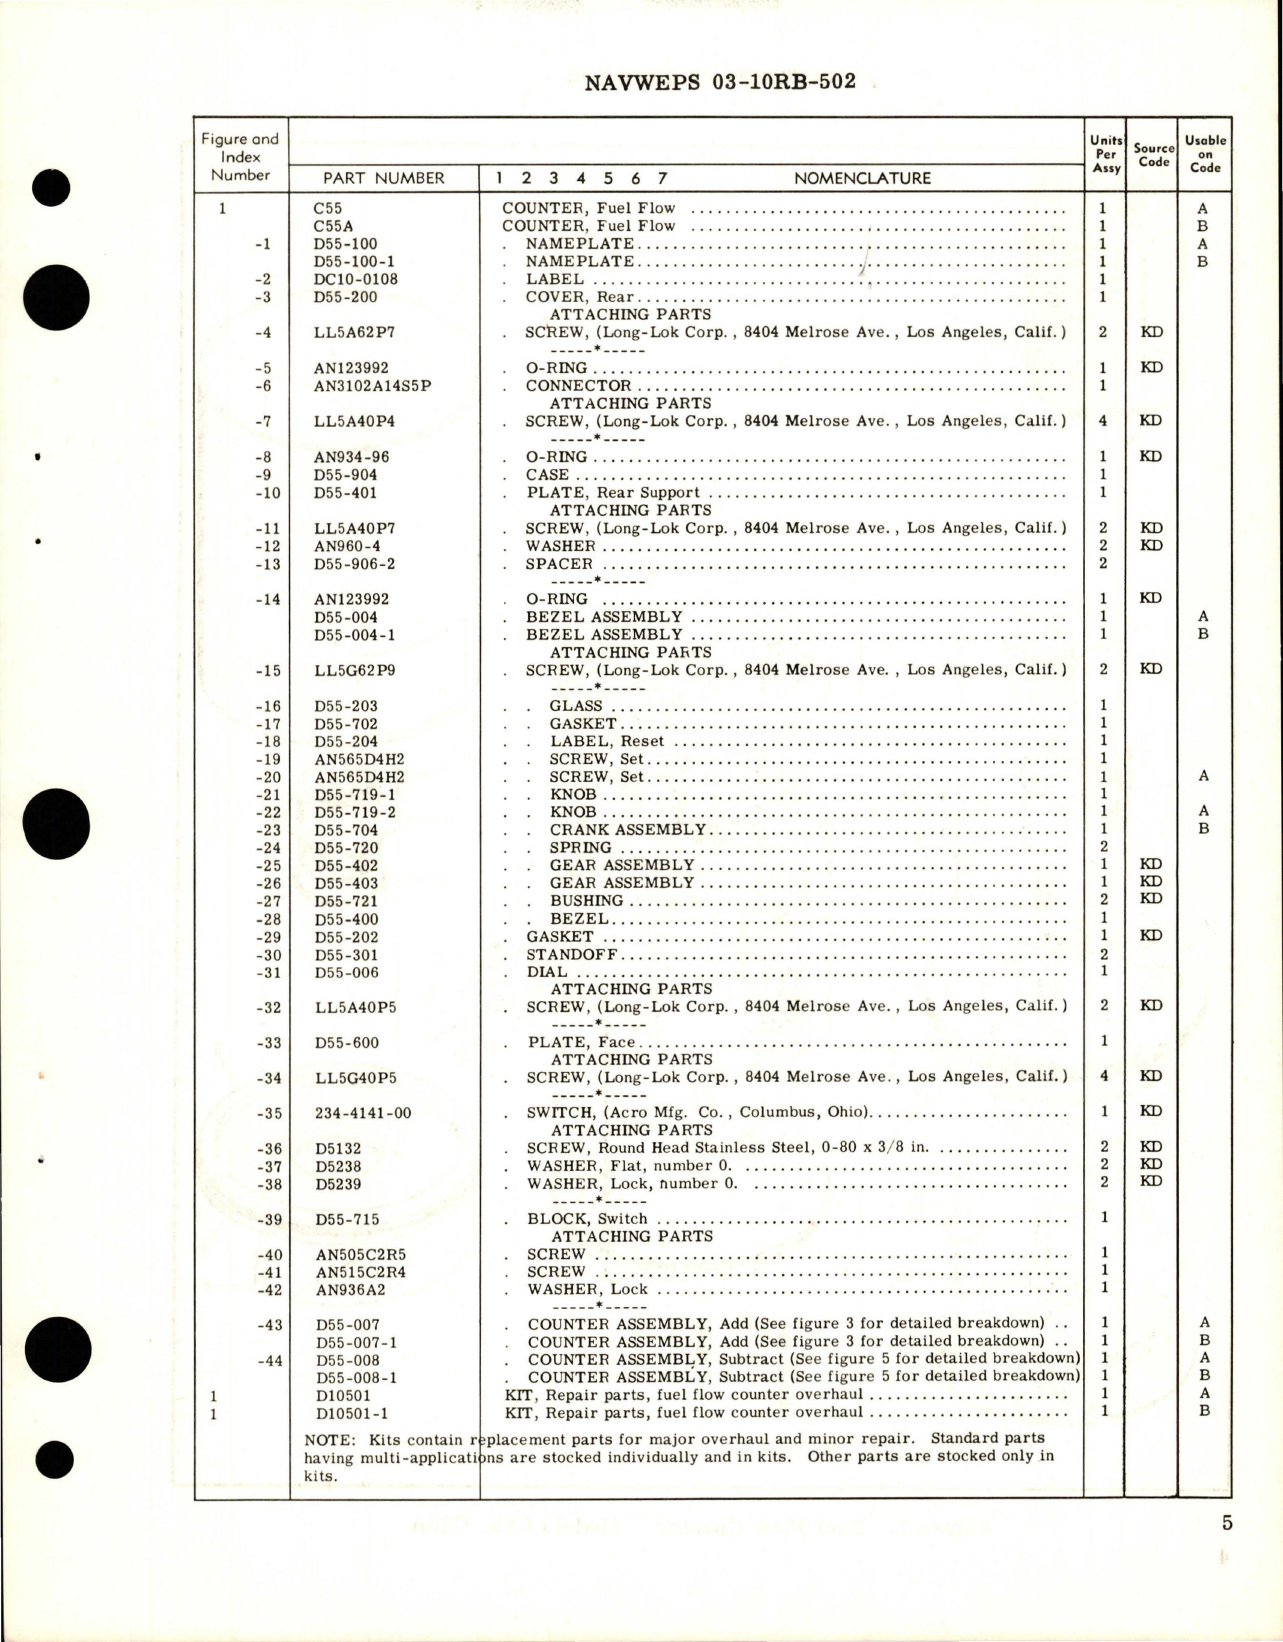 Sample page 7 from AirCorps Library document: Overhaul Instructions with Parts Breakdown for Fuel Flow Counter - Models C55, C55A, C55B, C55B1 and C55D